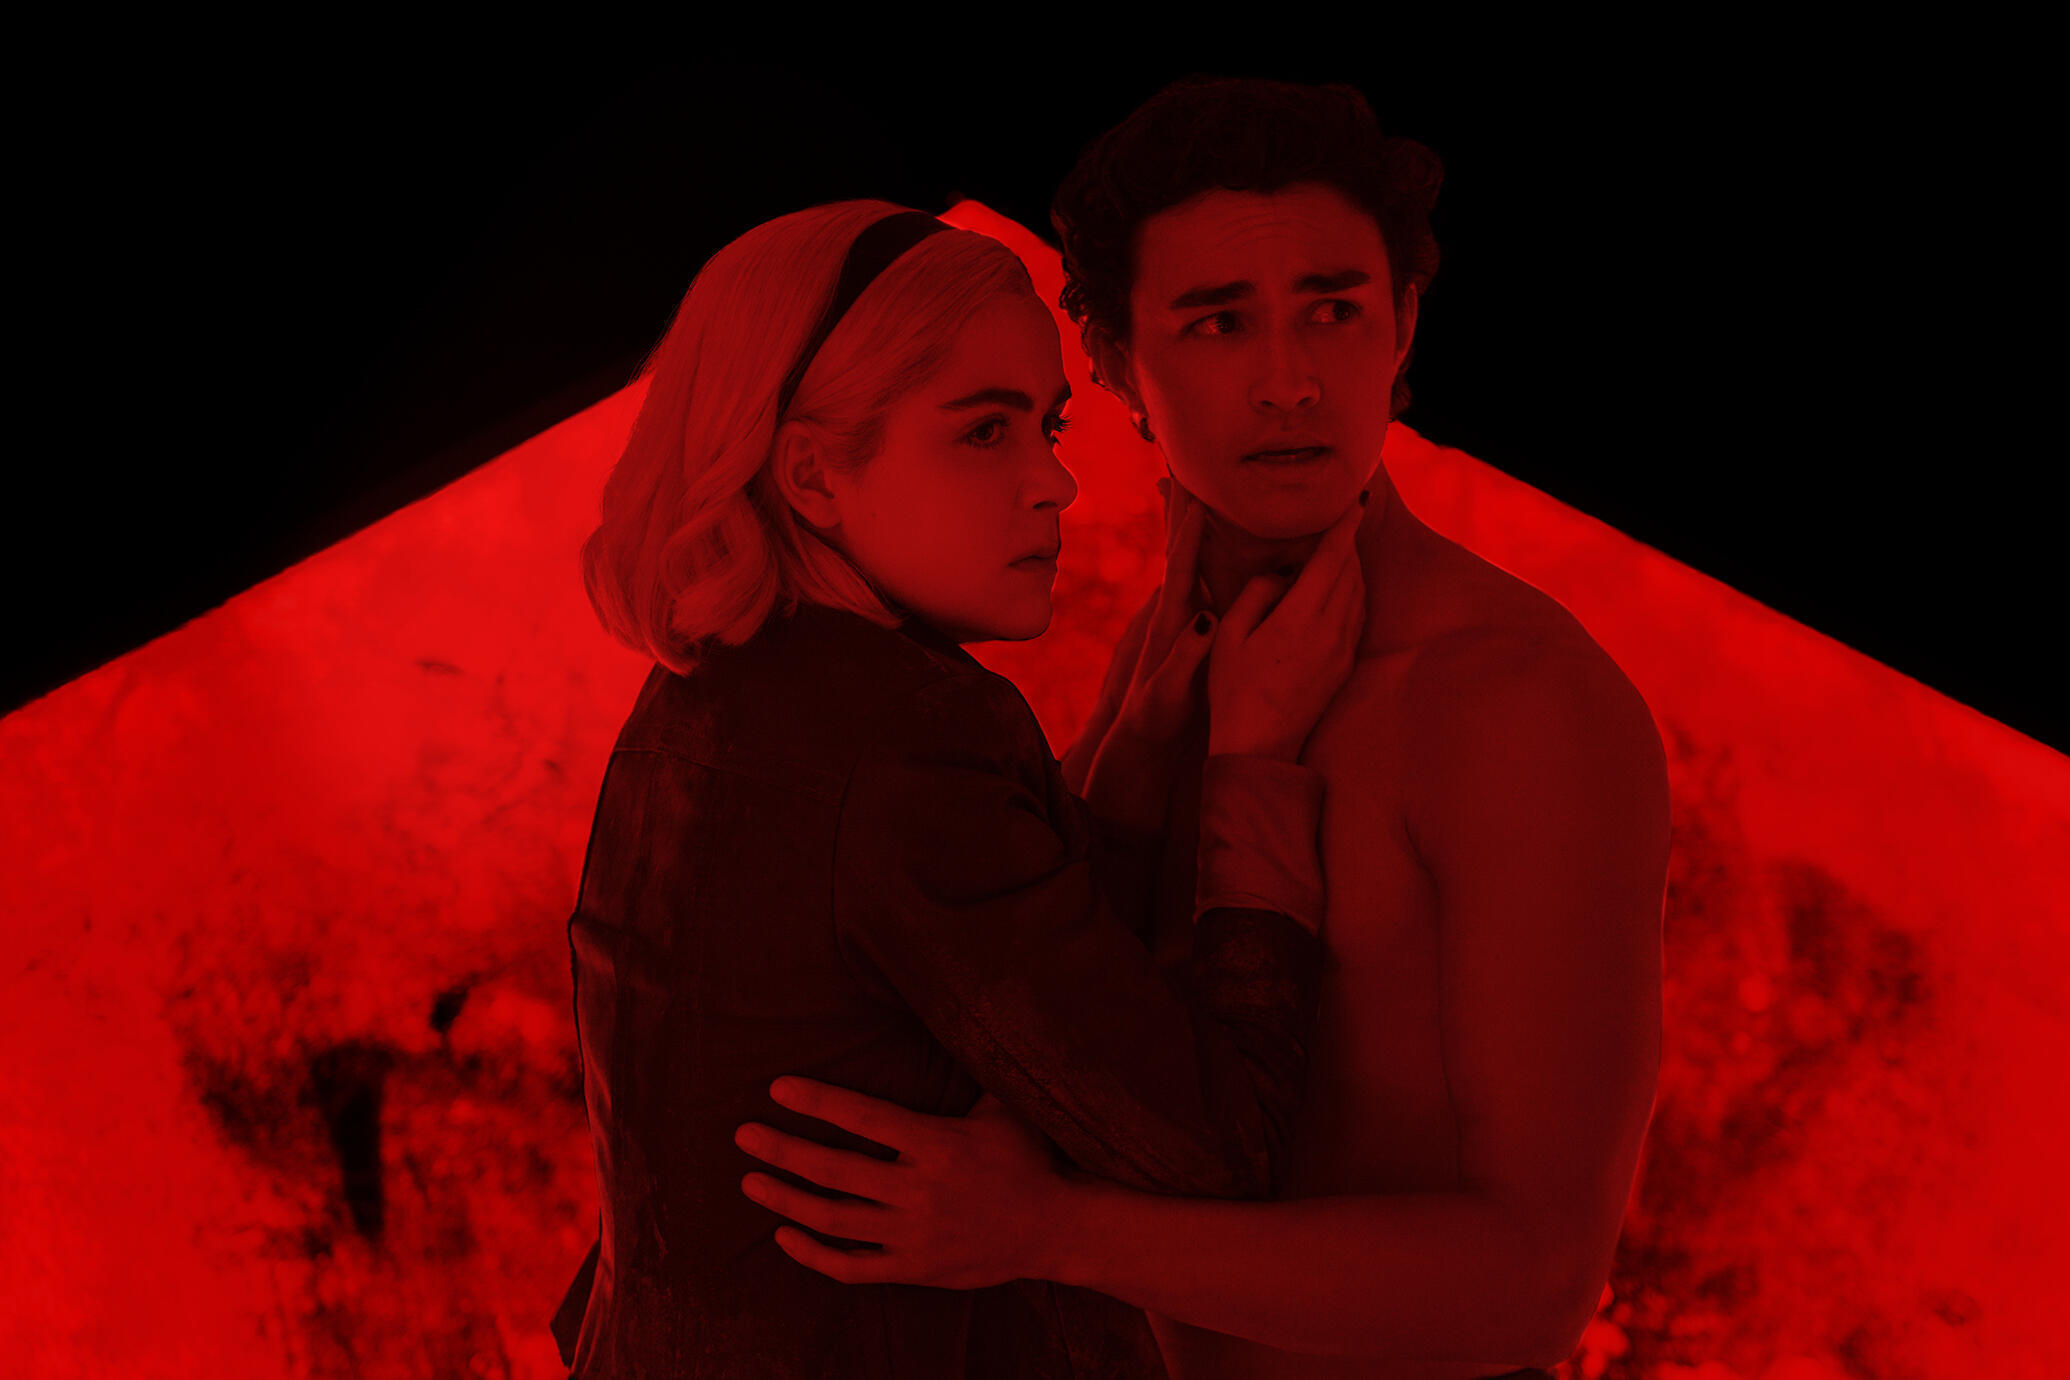 Chilling Adventures Of Sabrina 2020 Wallpapers